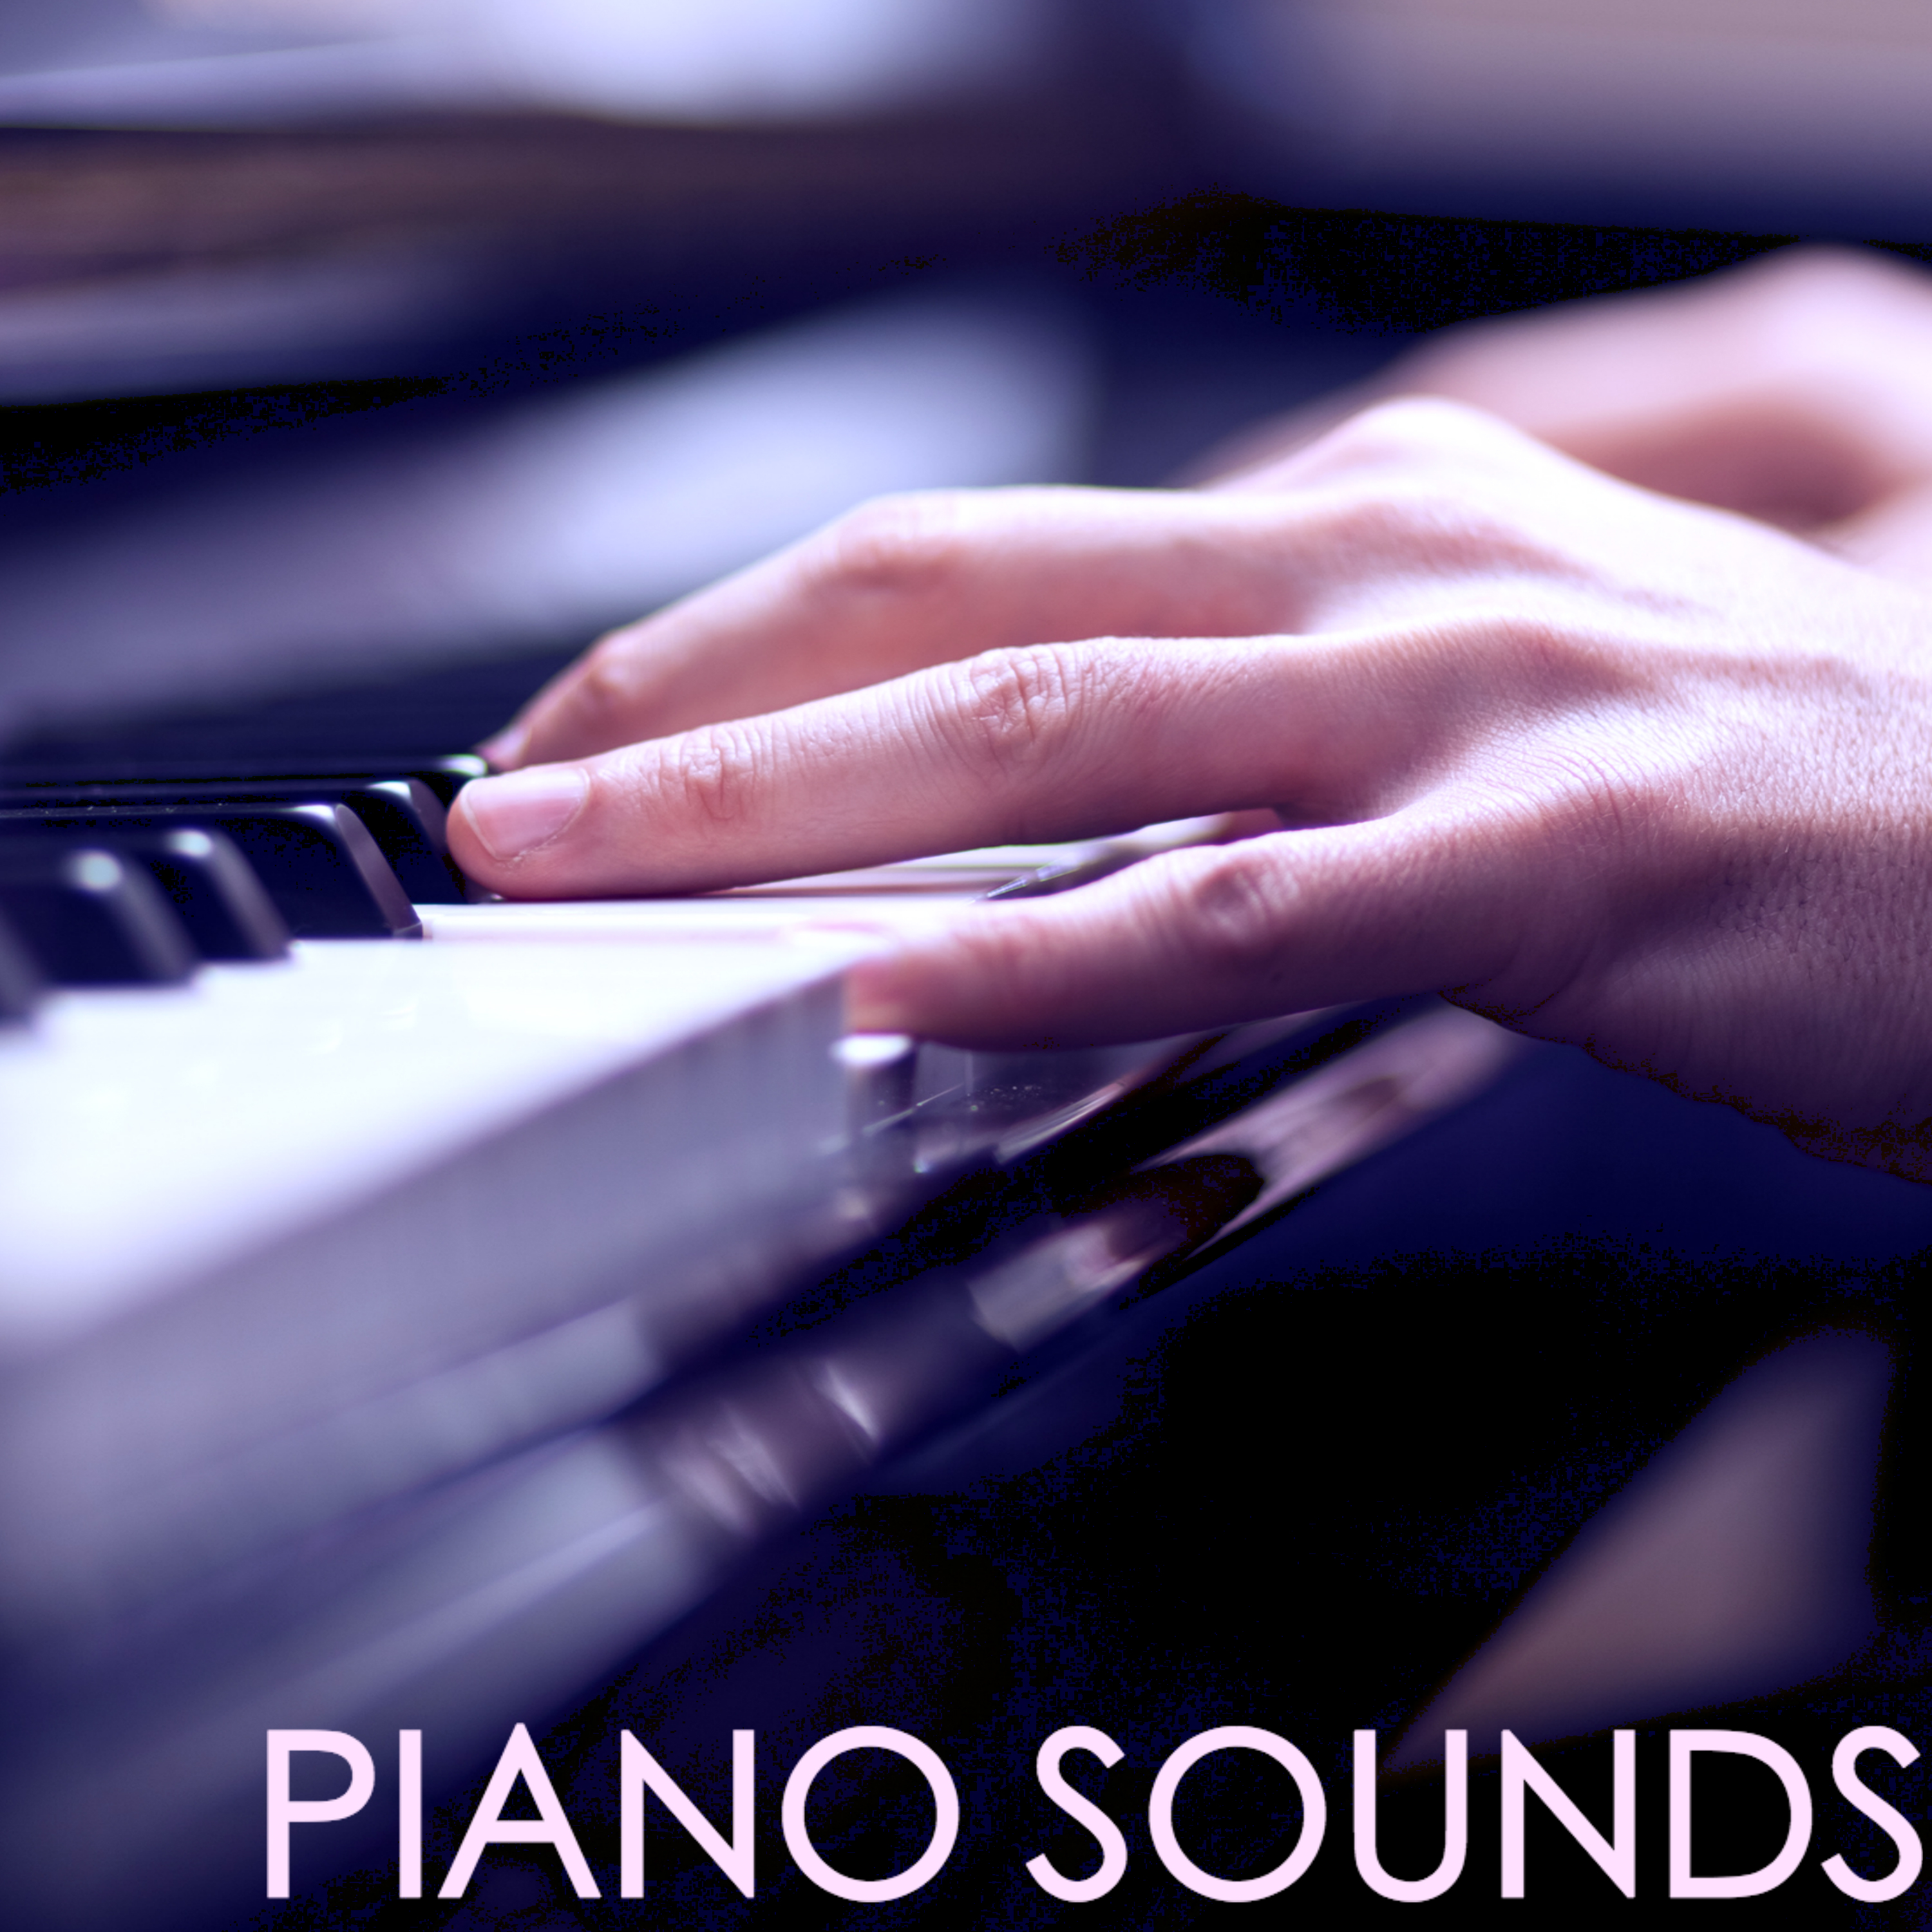 Instrumental Calming Piano Sounds - Background Sounds to Relax, Easy Listening Melody